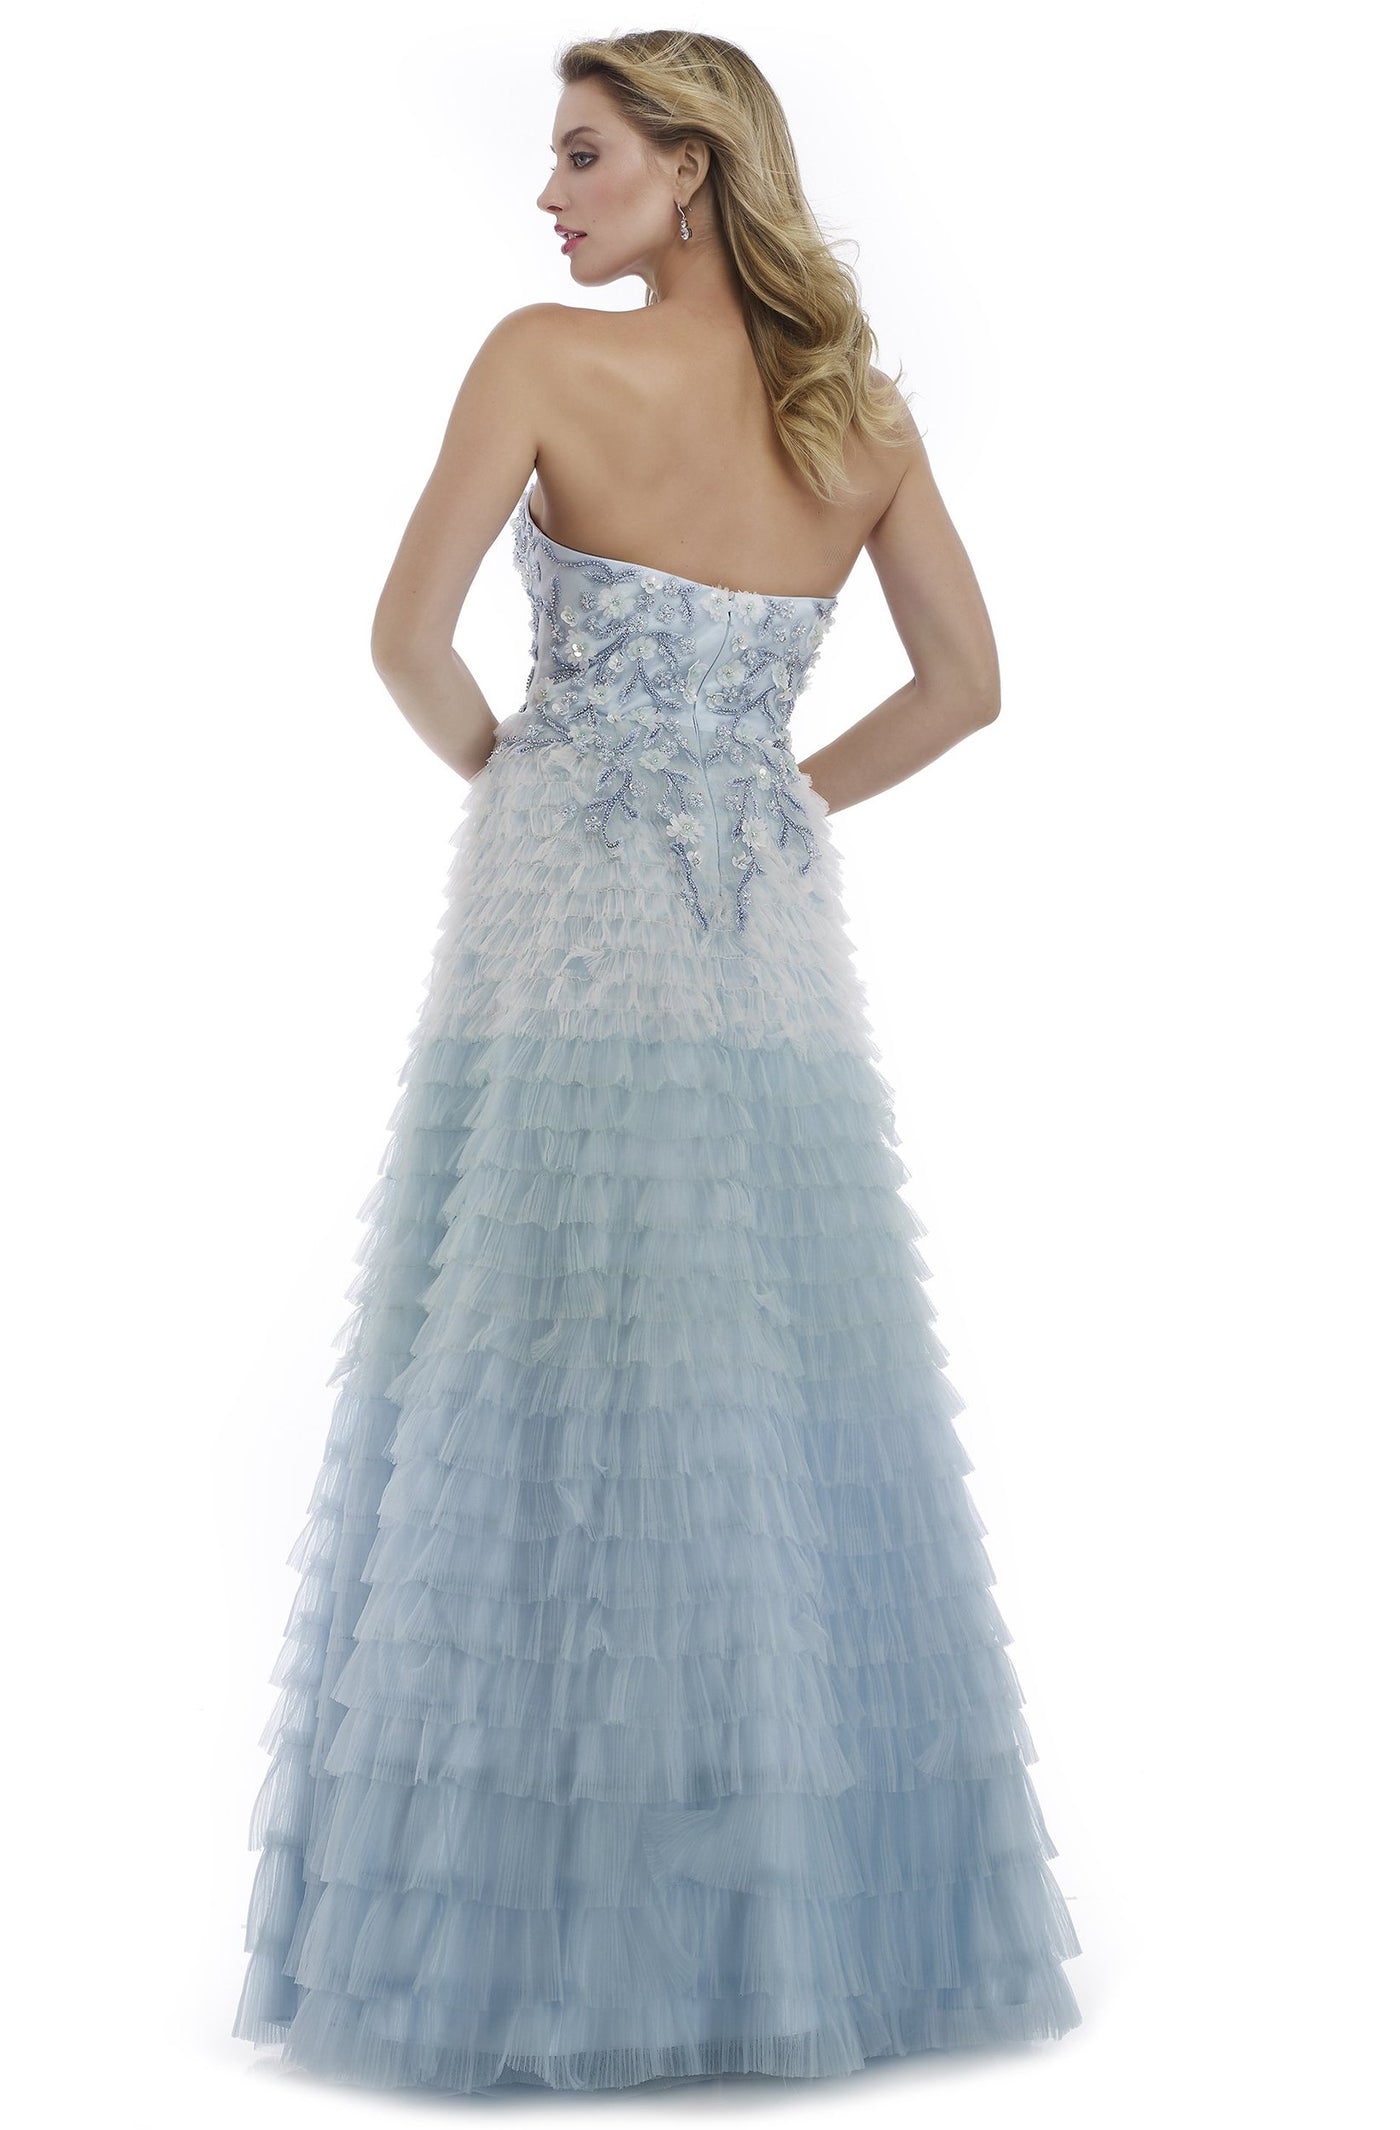 Morrell Maxie - 15979 Strapless Floral Appliqued Ruffled Gown in Blue